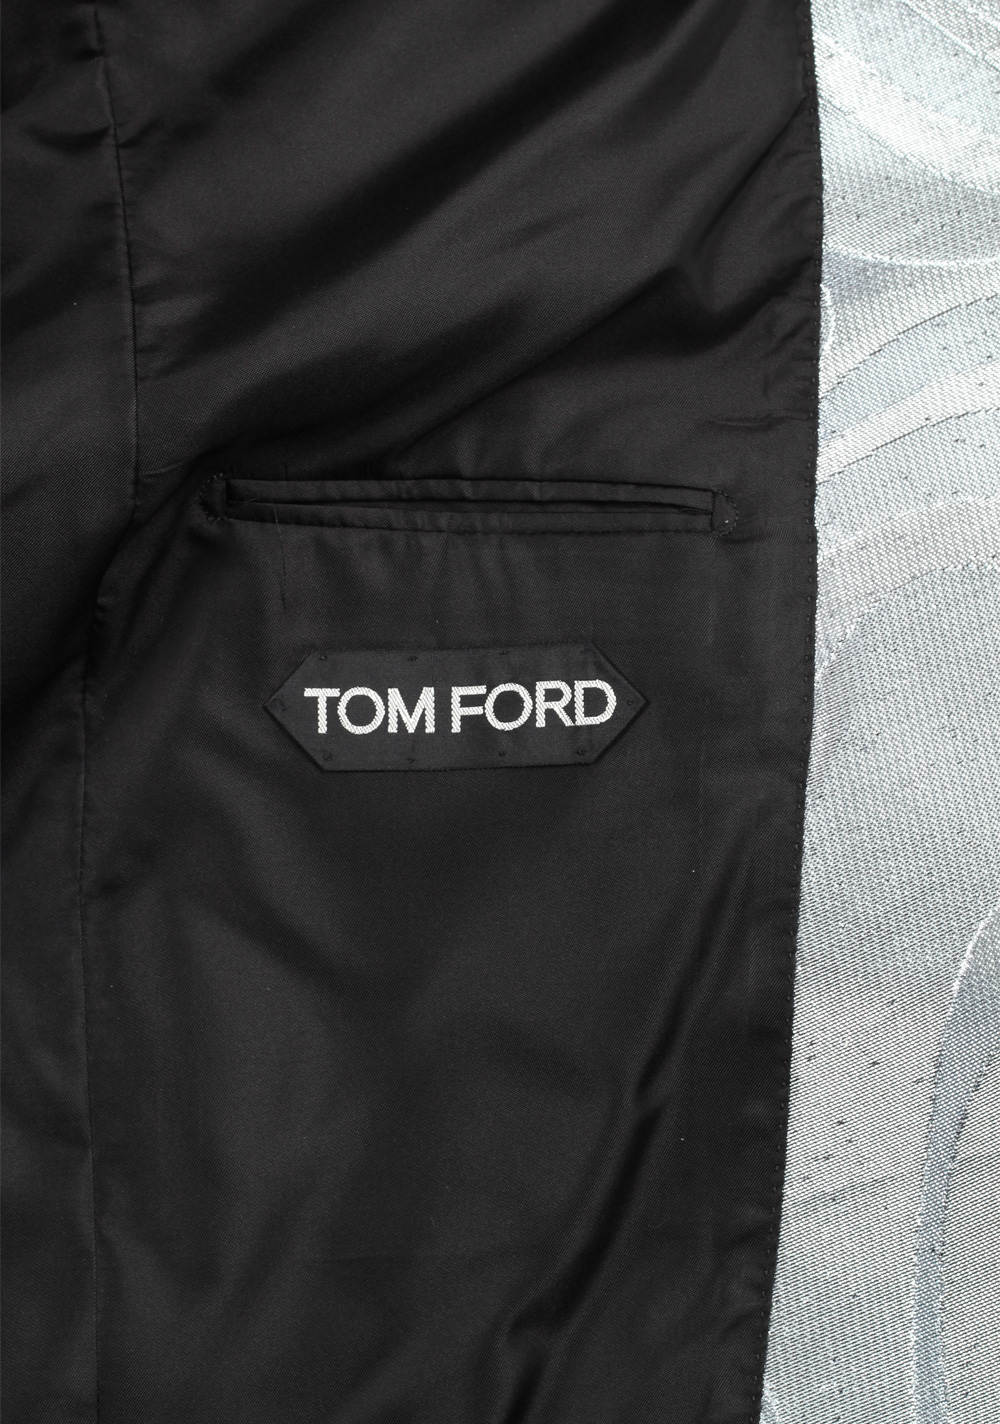 TOM FORD Atticus Silver Cocktail Dinner Jacket Size 56 / 46 U.S. | Costume Limité